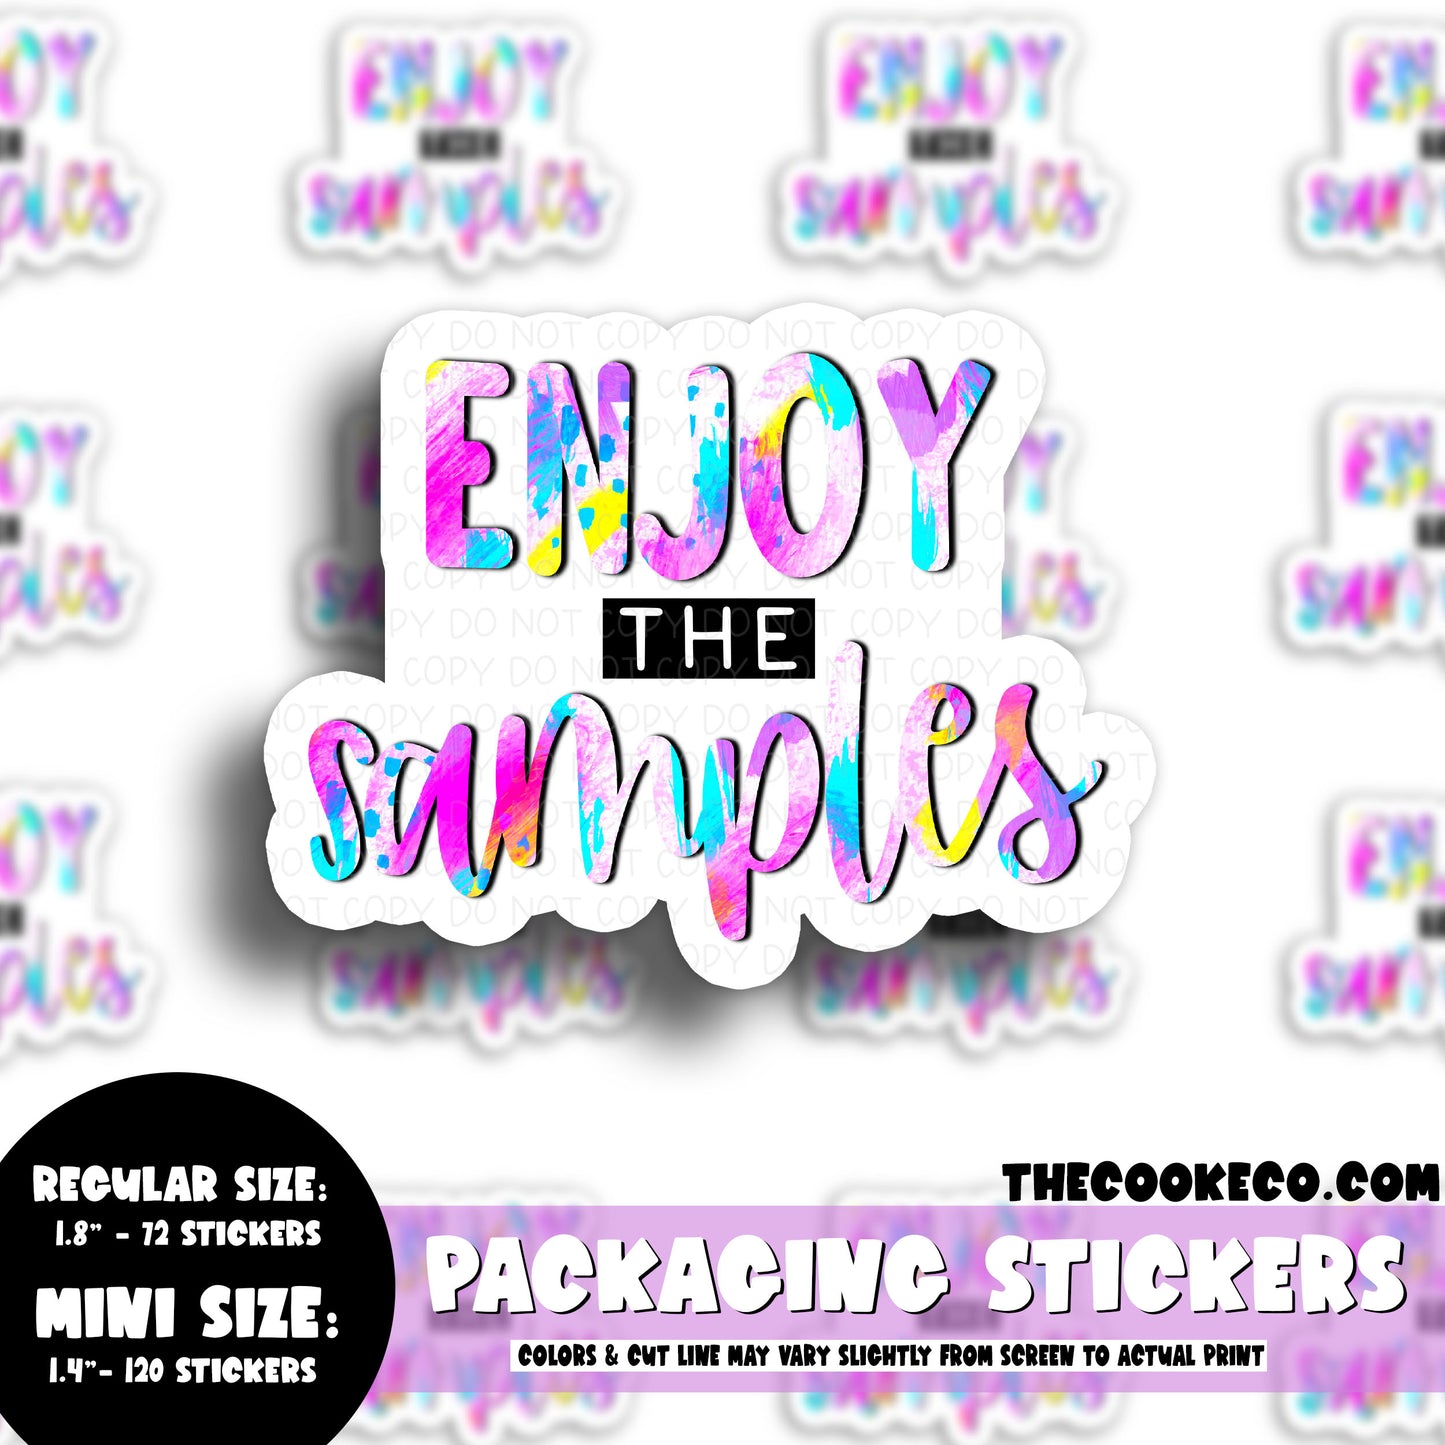 PTO Packaging Stickers | #C0715 - ENJOY THE SAMPLES